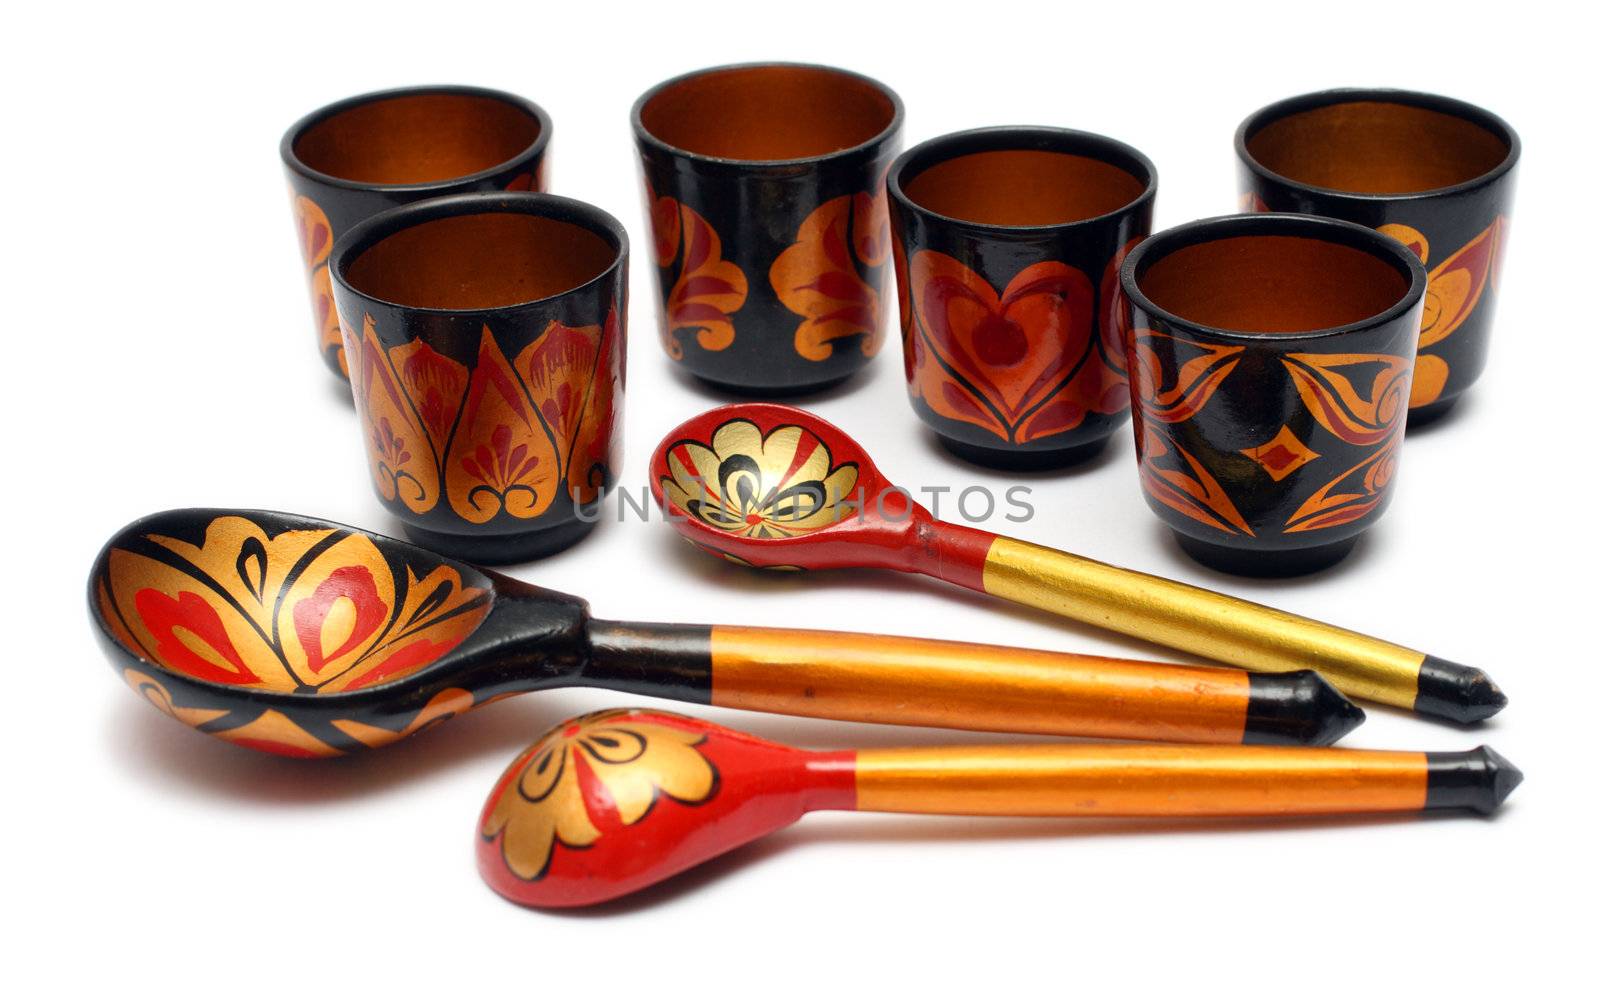 set of russian wooden spoons and cups by Mikko